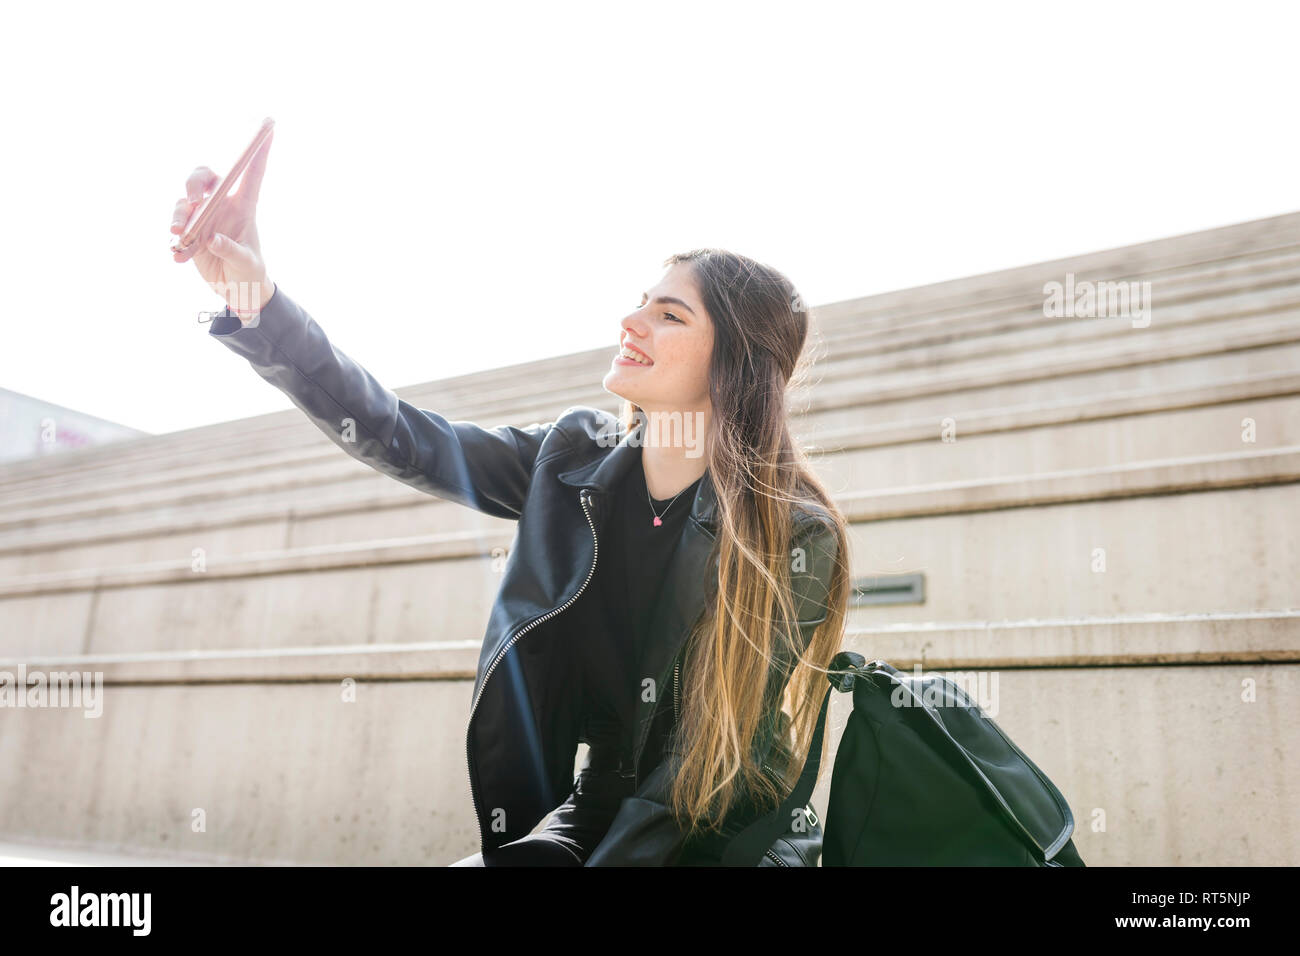 Smiling young woman sitting on stairs taking a selfie Stock Photo